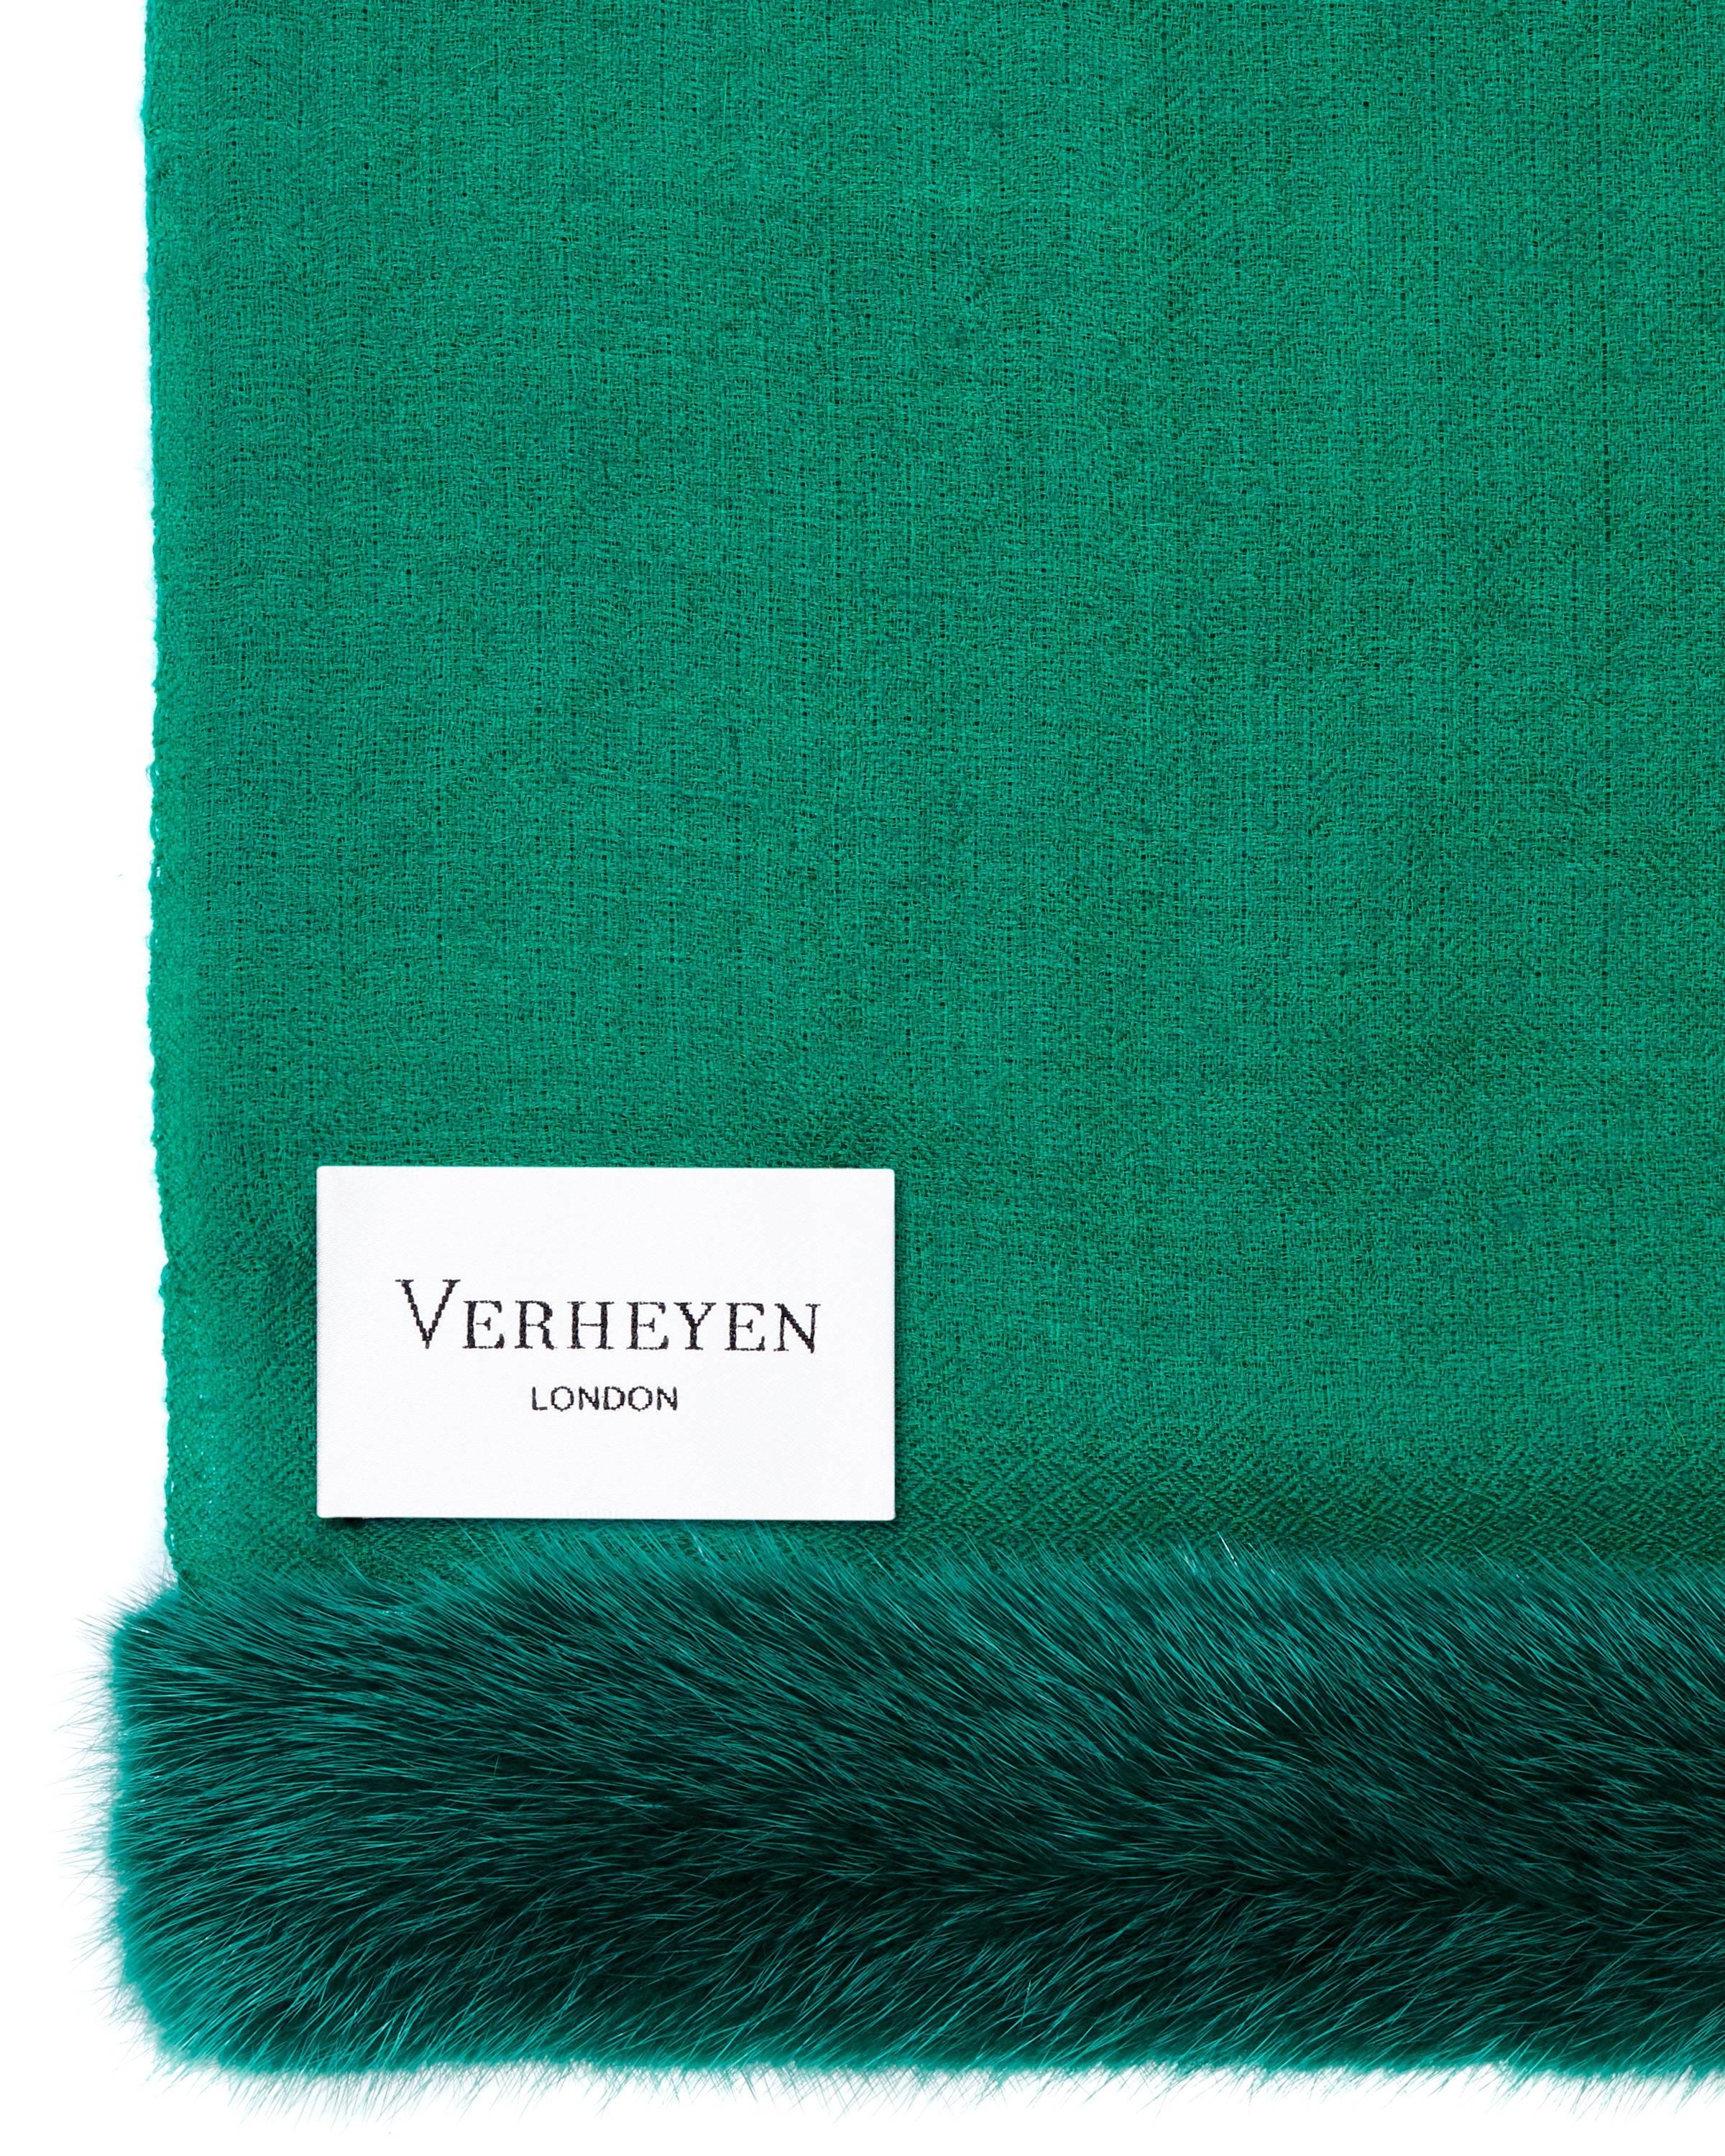 Verheyen London’s shawl is spun from the finest lightweight handwoven cashmere from Kashmir and finished with the most exquisite dyed mink. Its warmth envelopes you with luxury, perfect for travel and comfort wherever you are.

PRODUCT